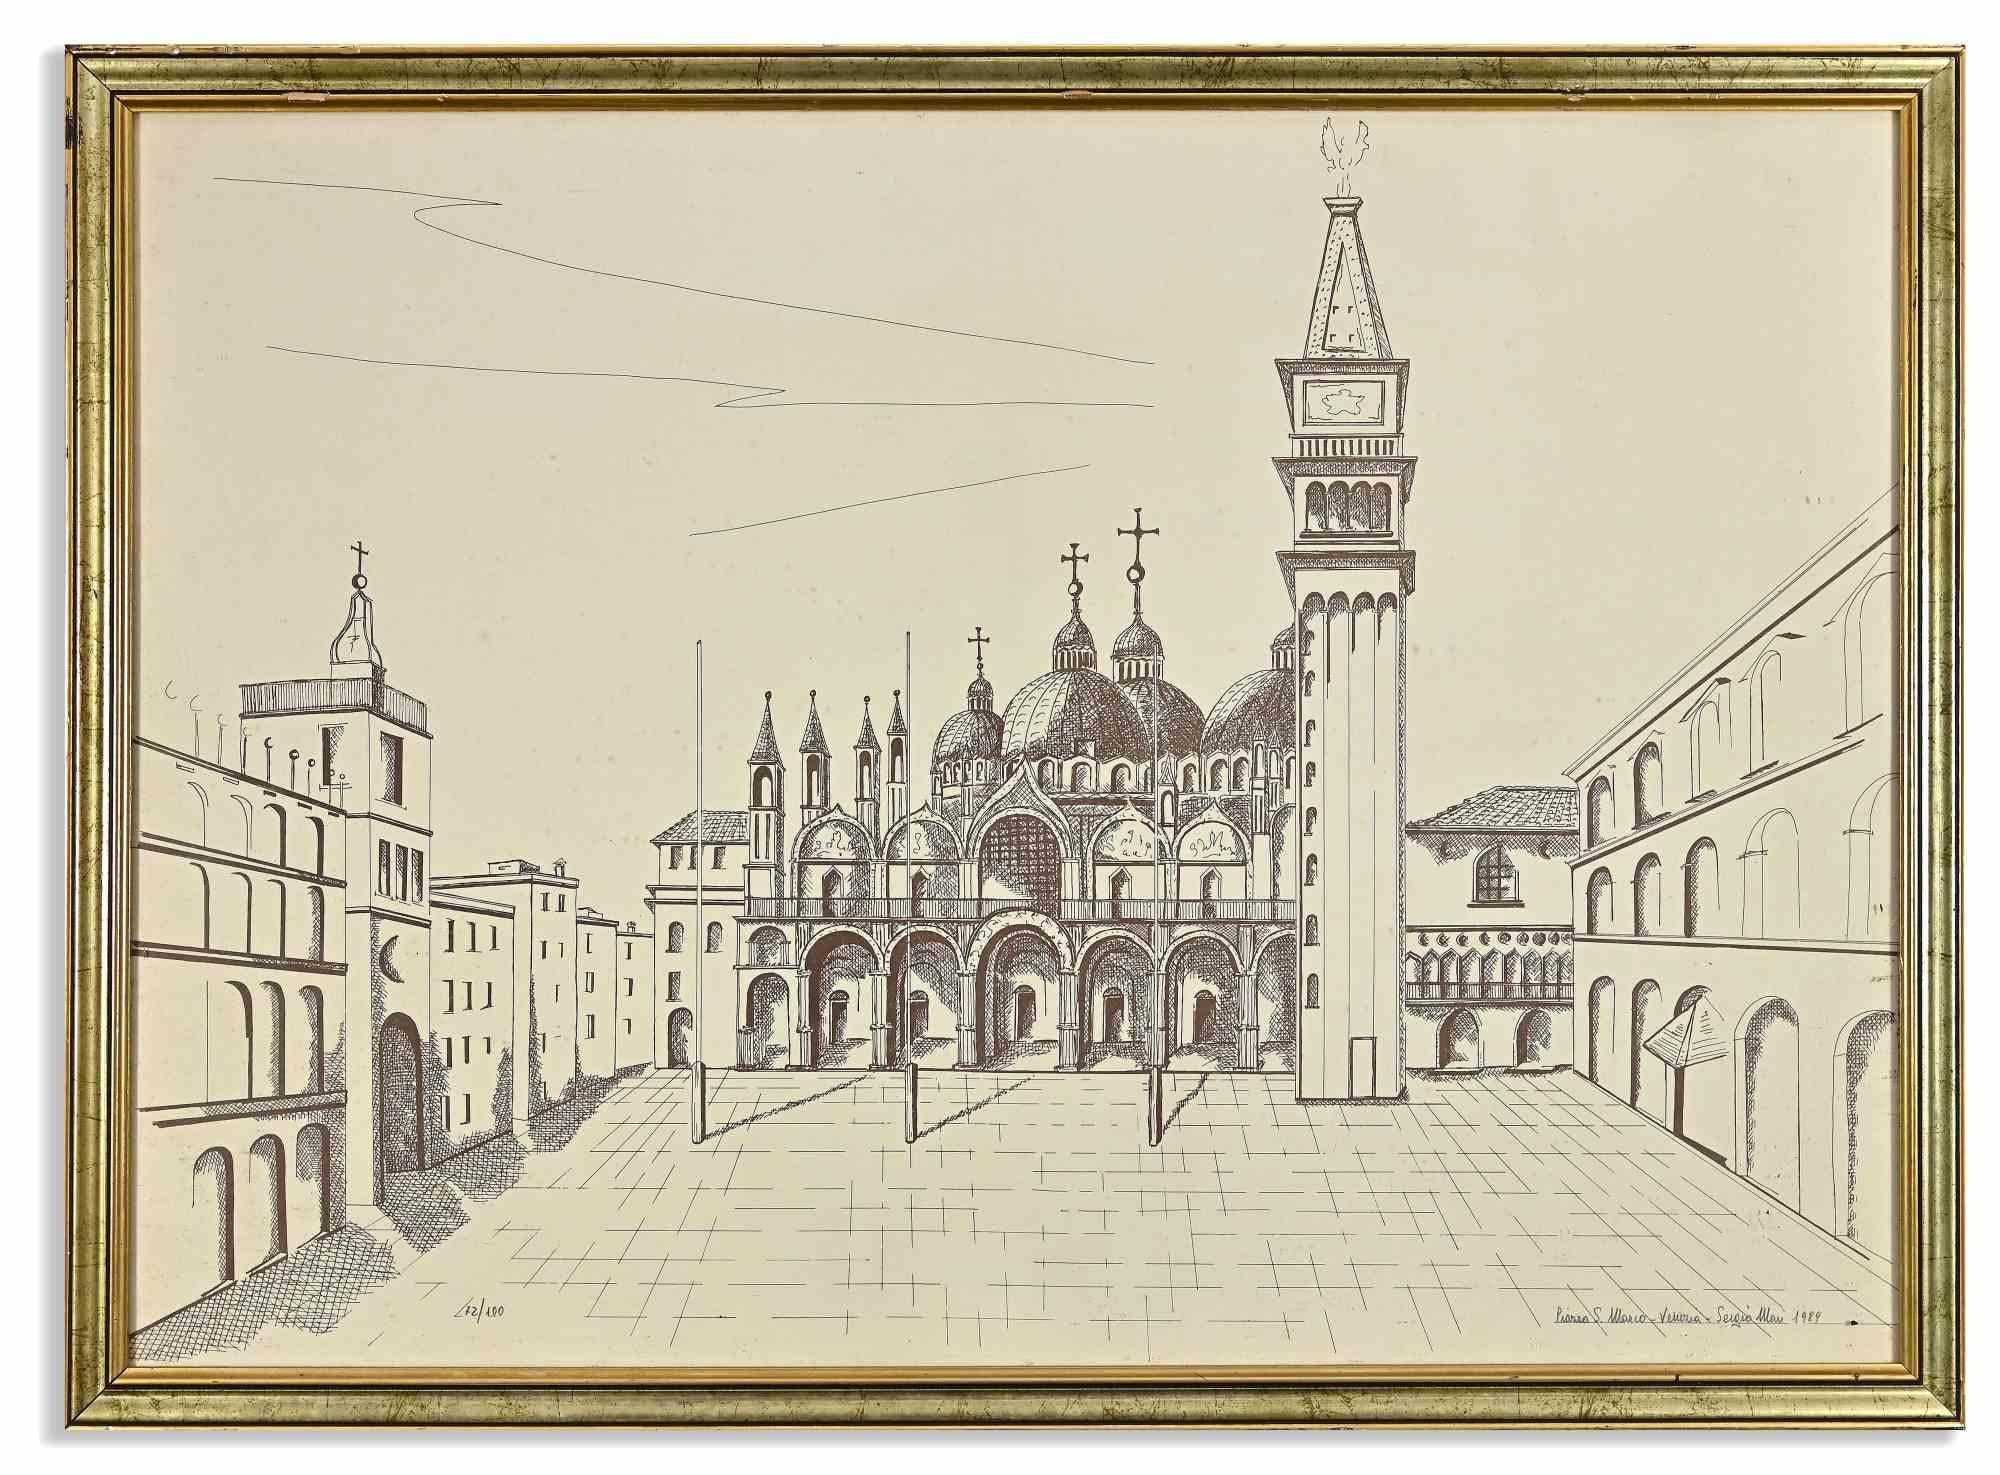 St Mark's Square, Venice is a modern artwork realized by Sergio Mari in 1989.

Lithograph on paper.

Hand signed, titled and datet on the lower right margin.

Numbered on the lower left margin.

Edition of 72/100

Includes frame: 54.5 x 2 x  74.5